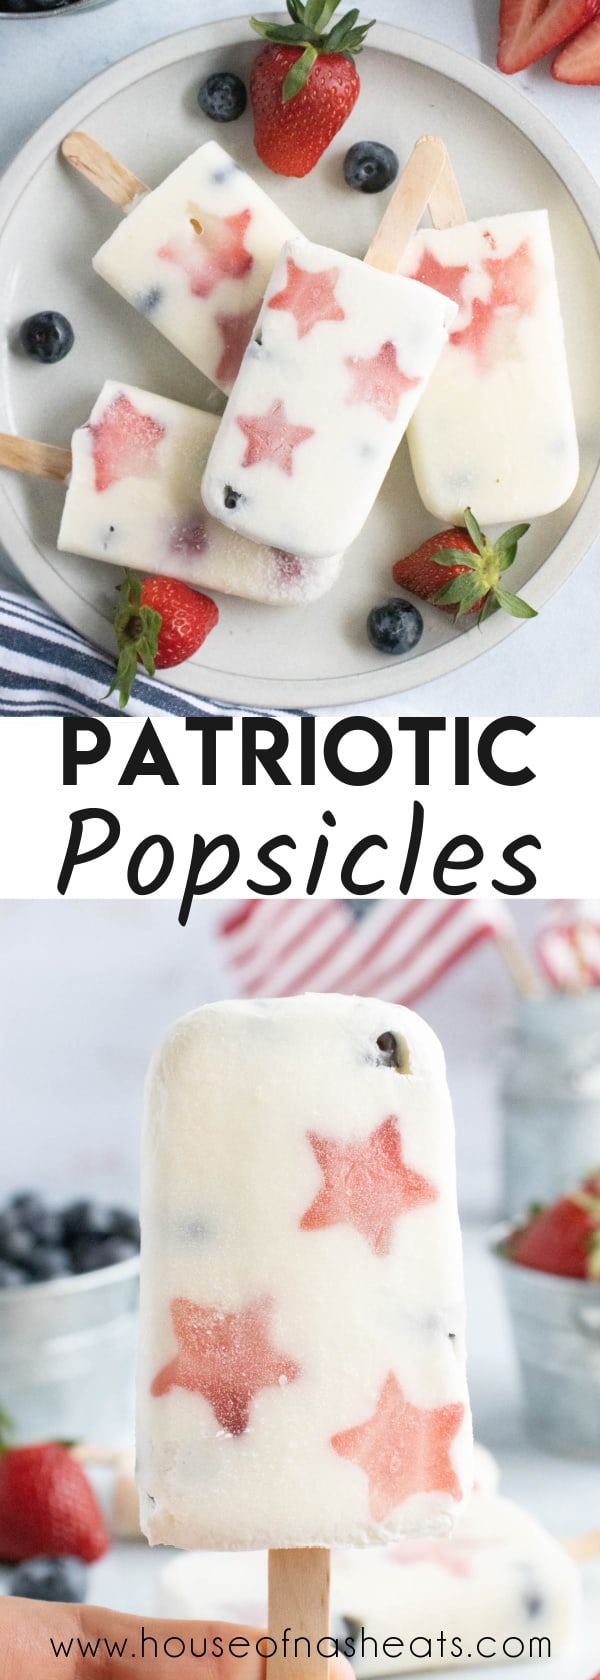 A collage of images of patriotic popsicles with text overlay.